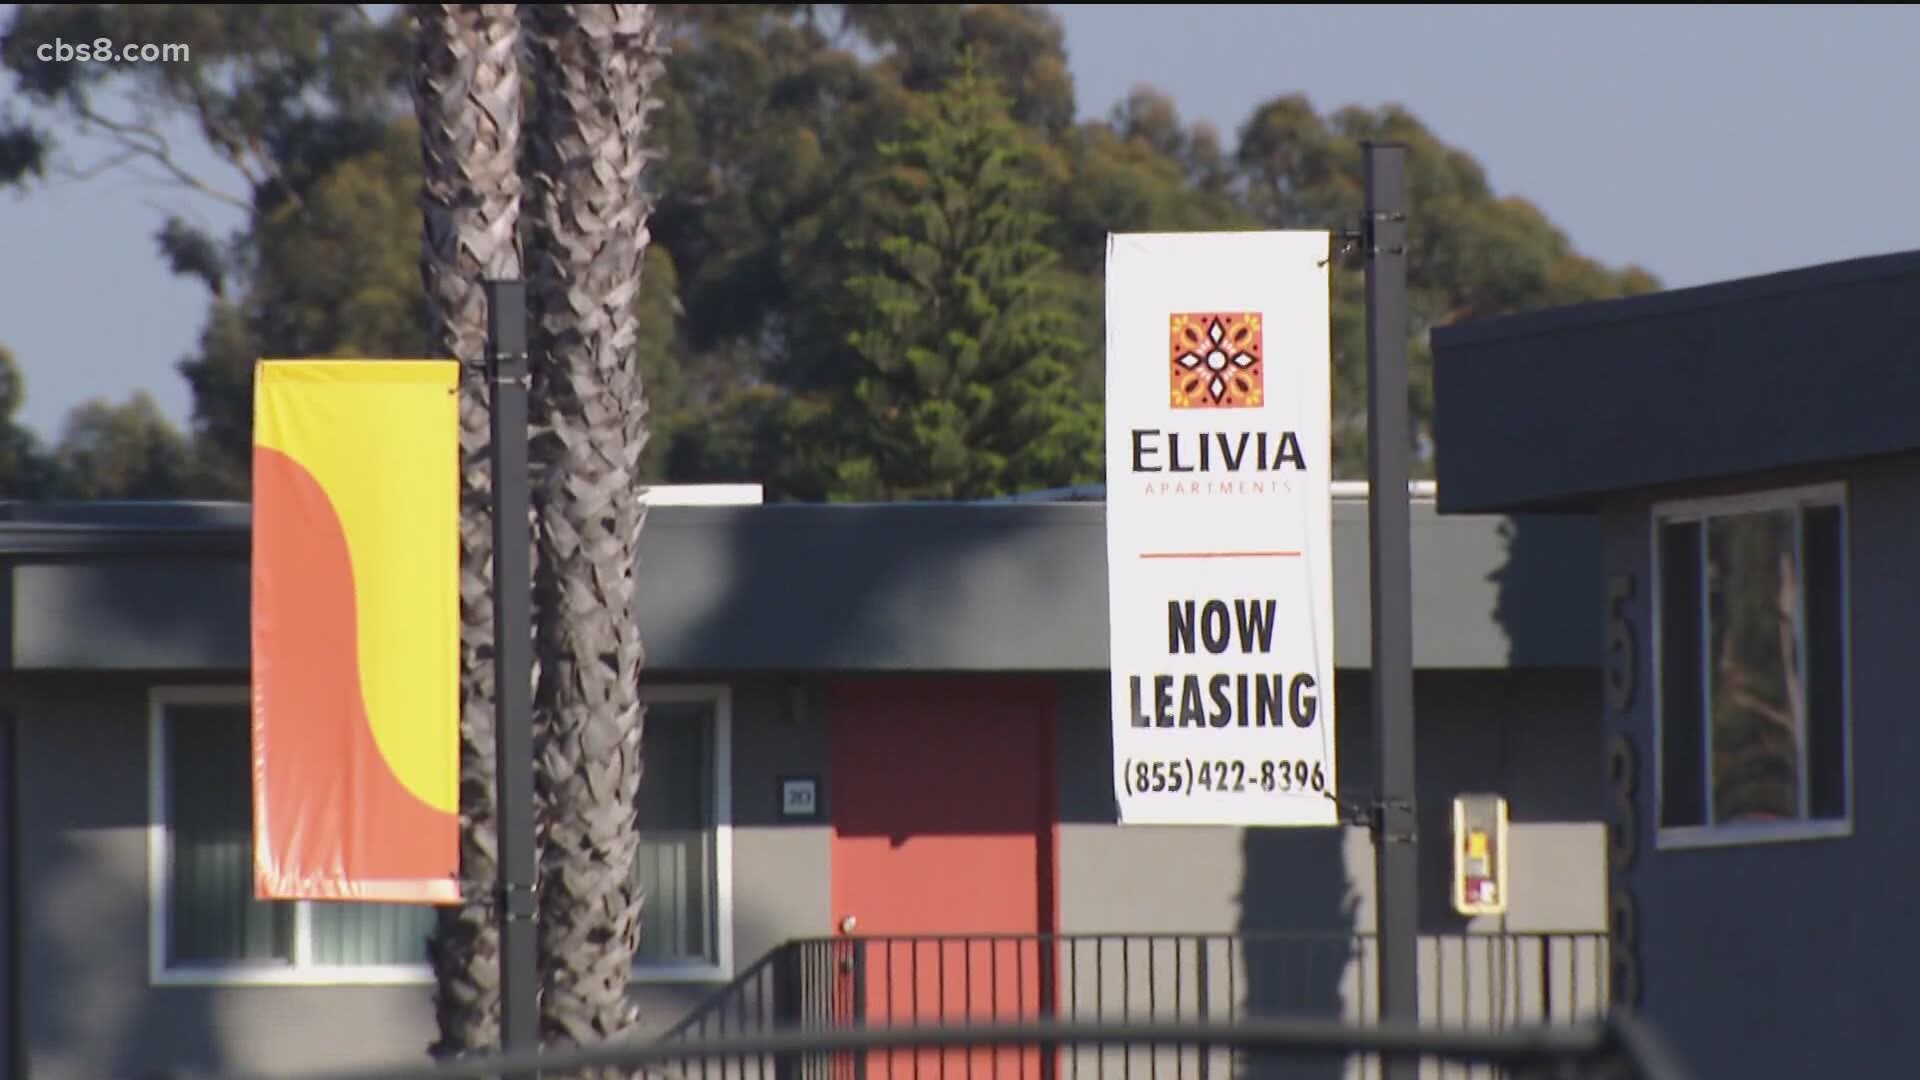 San Diego tenants and landlords are stressed as the end of June approaches.